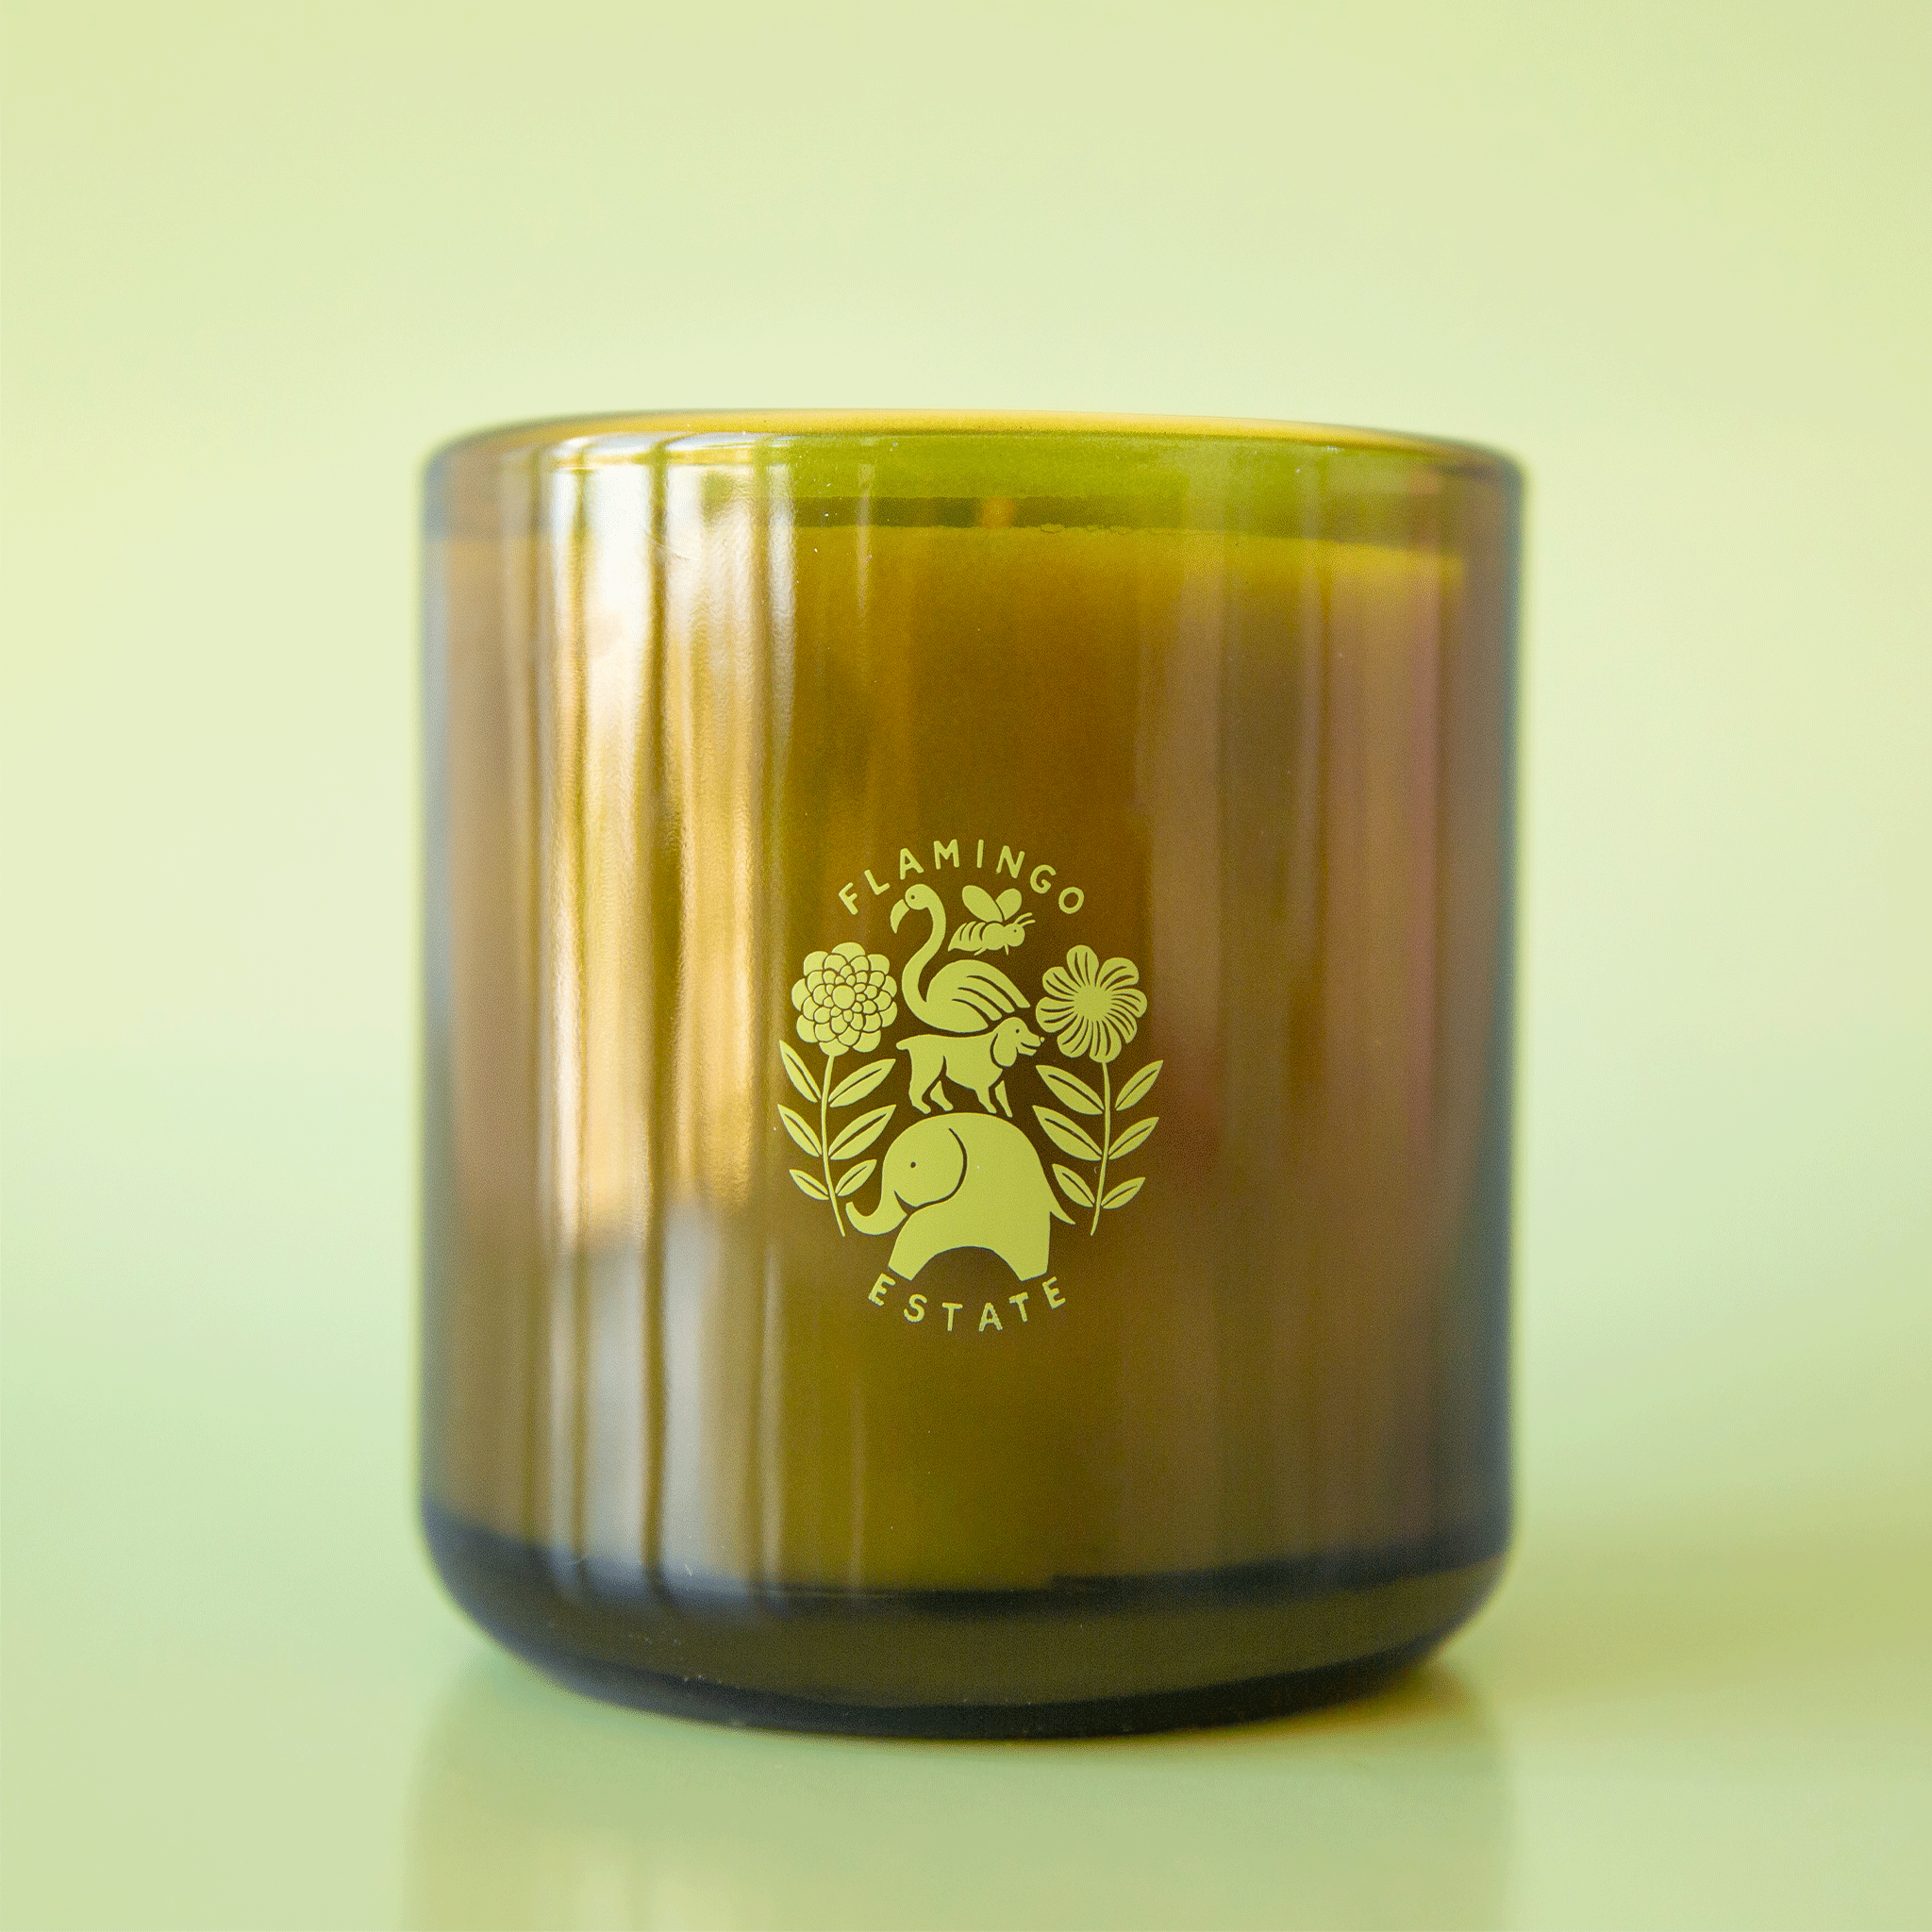 On a green background is a green glass jar candle with a logo in the center that reads, &quot;Flamingo Estate&quot;.